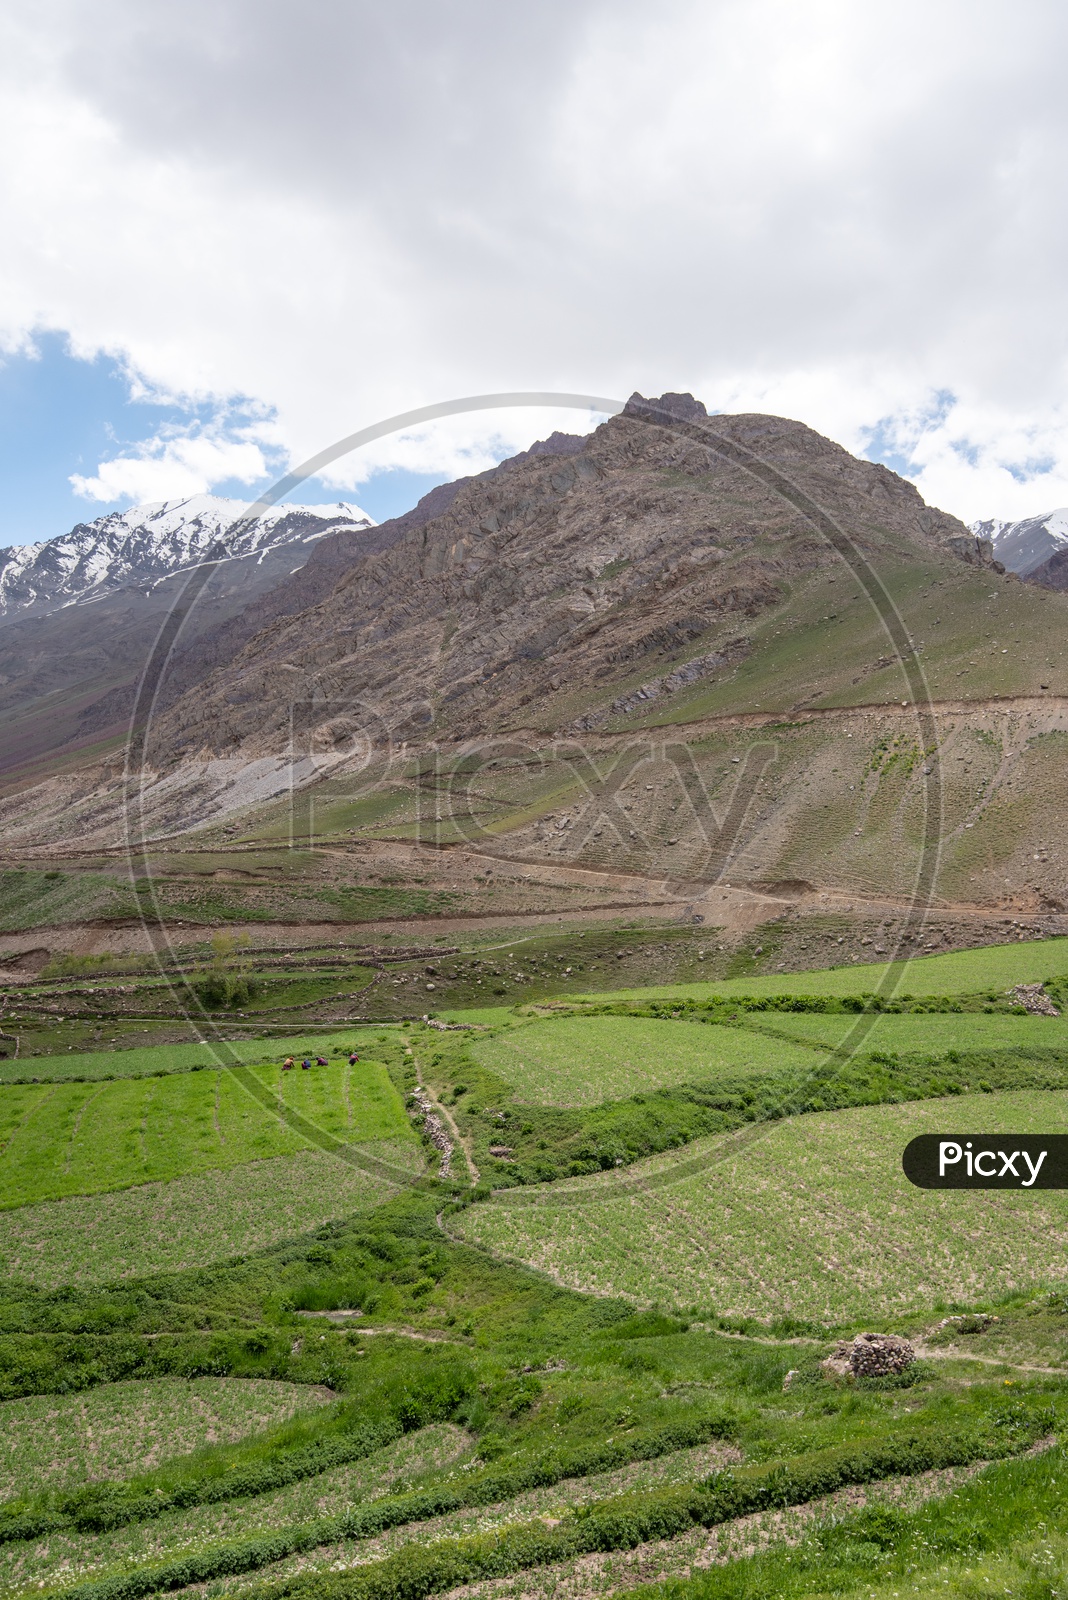 Agricultural farm lands in the Spiti Valley with snow clad mountains in the background